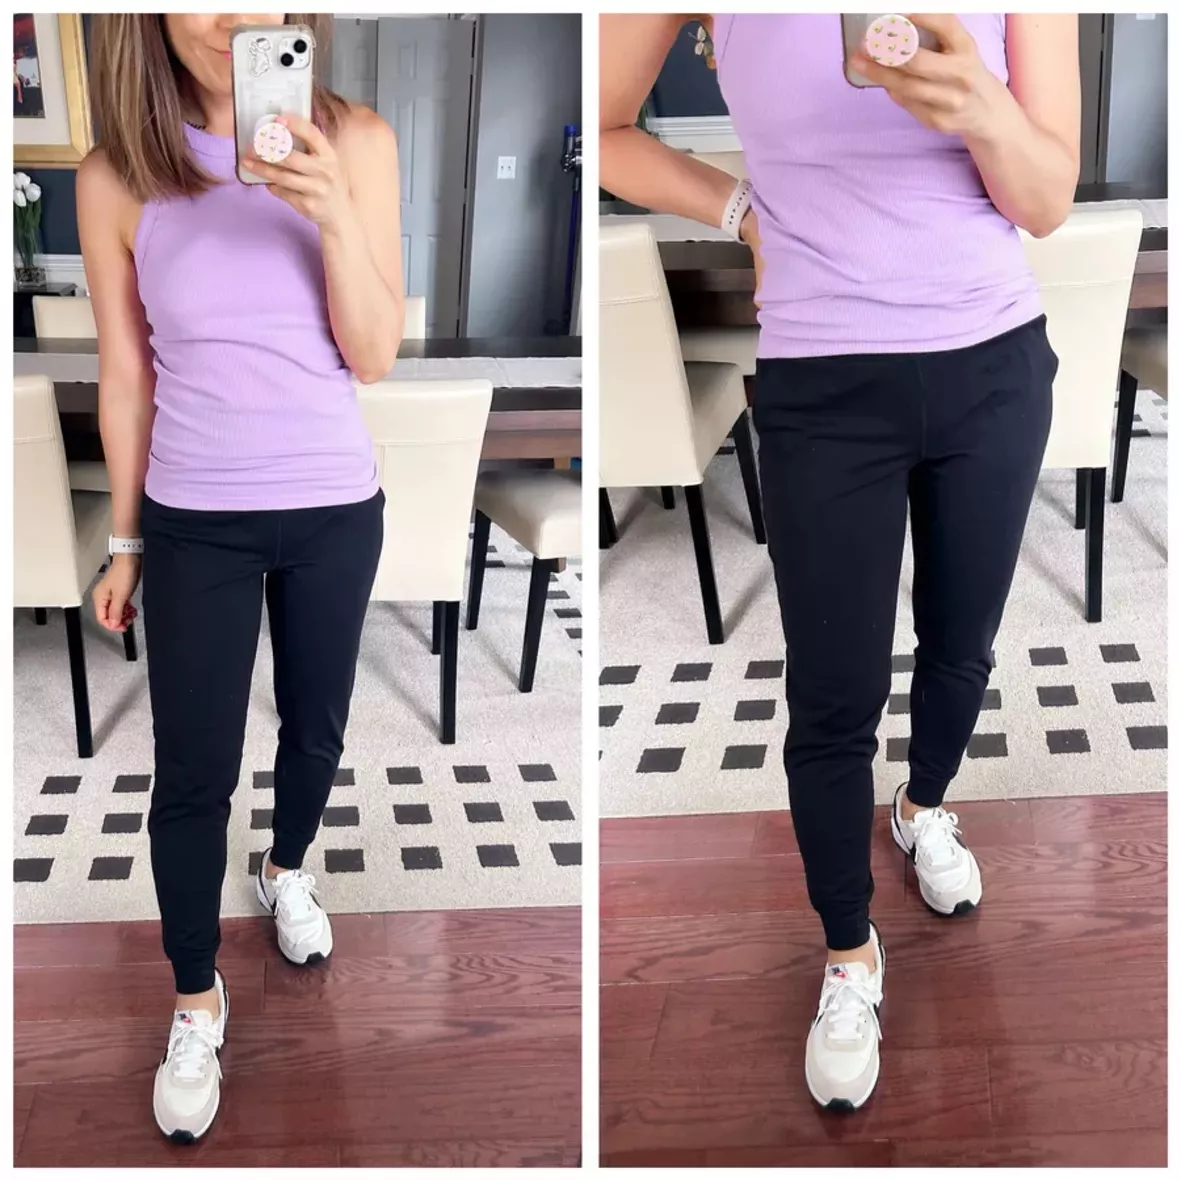 Athletic Works White Casual Pants for Women